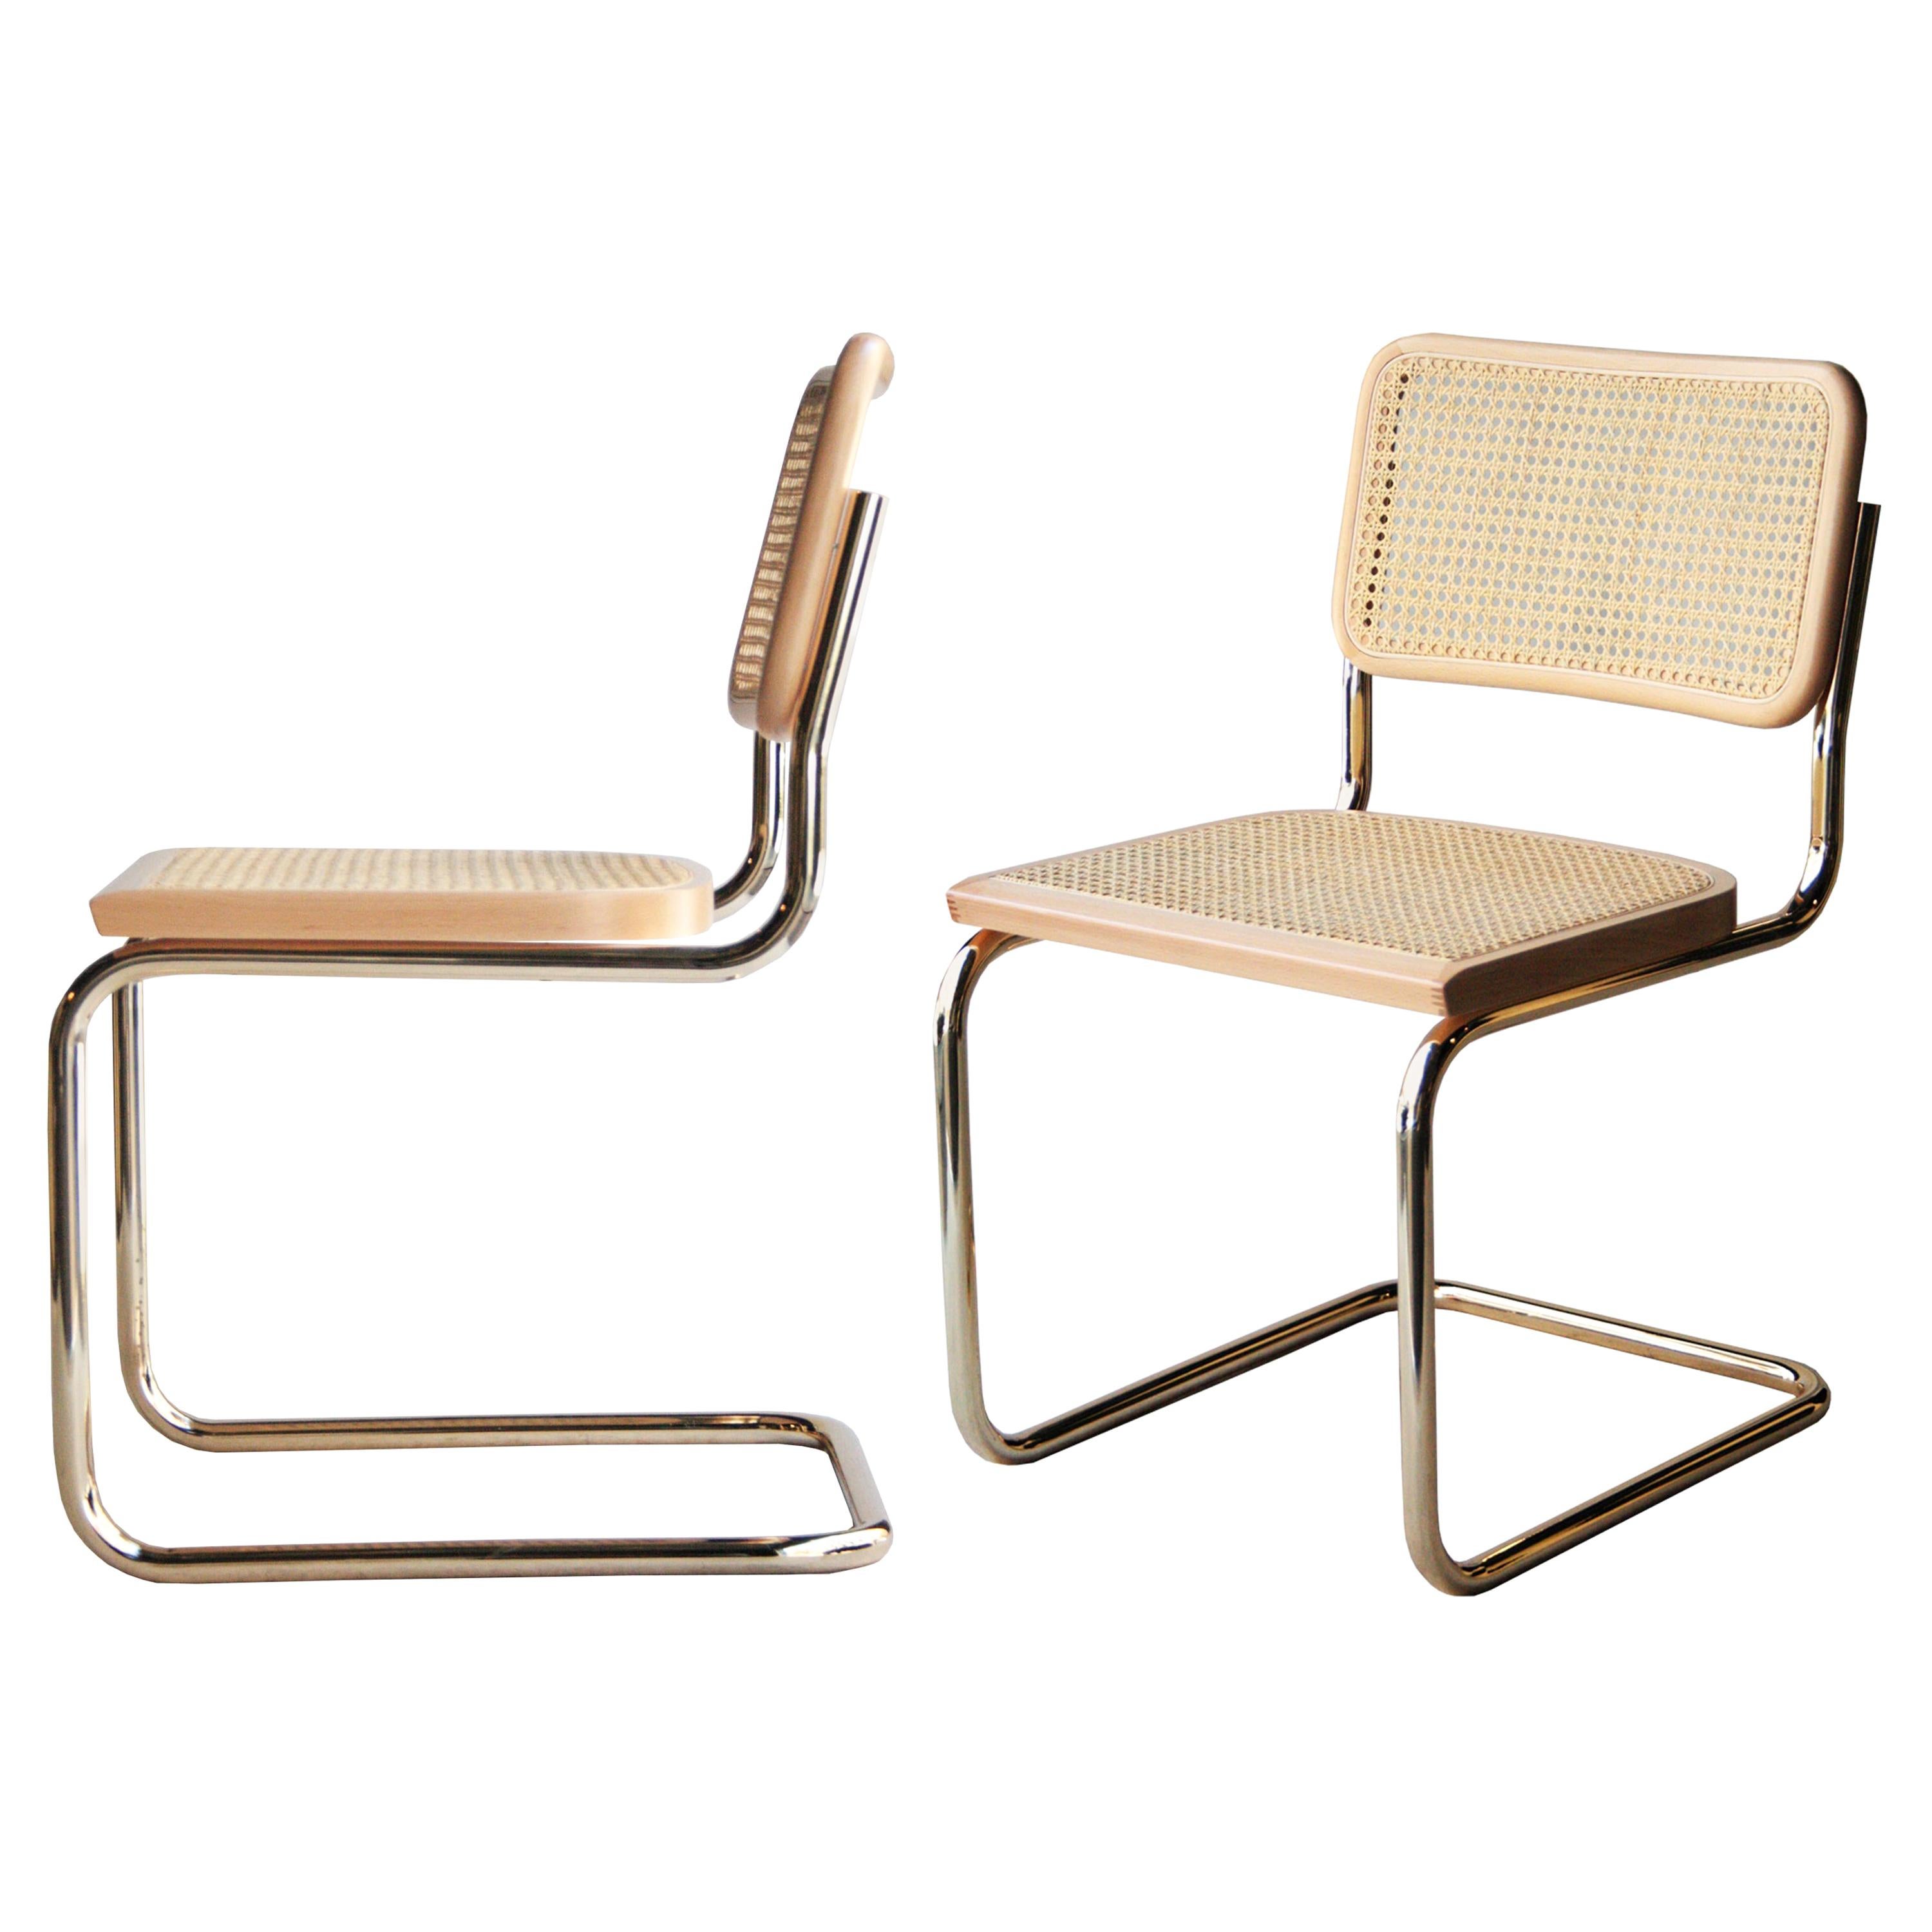 Set of 6 Cesca chairs designed by Marcel Breuer in 1962 and produced in Spain during de 1960s by MYC under the license of Gavina. Brassed tubular structure, oakwood frame with braided natural fiber seat and back.
 